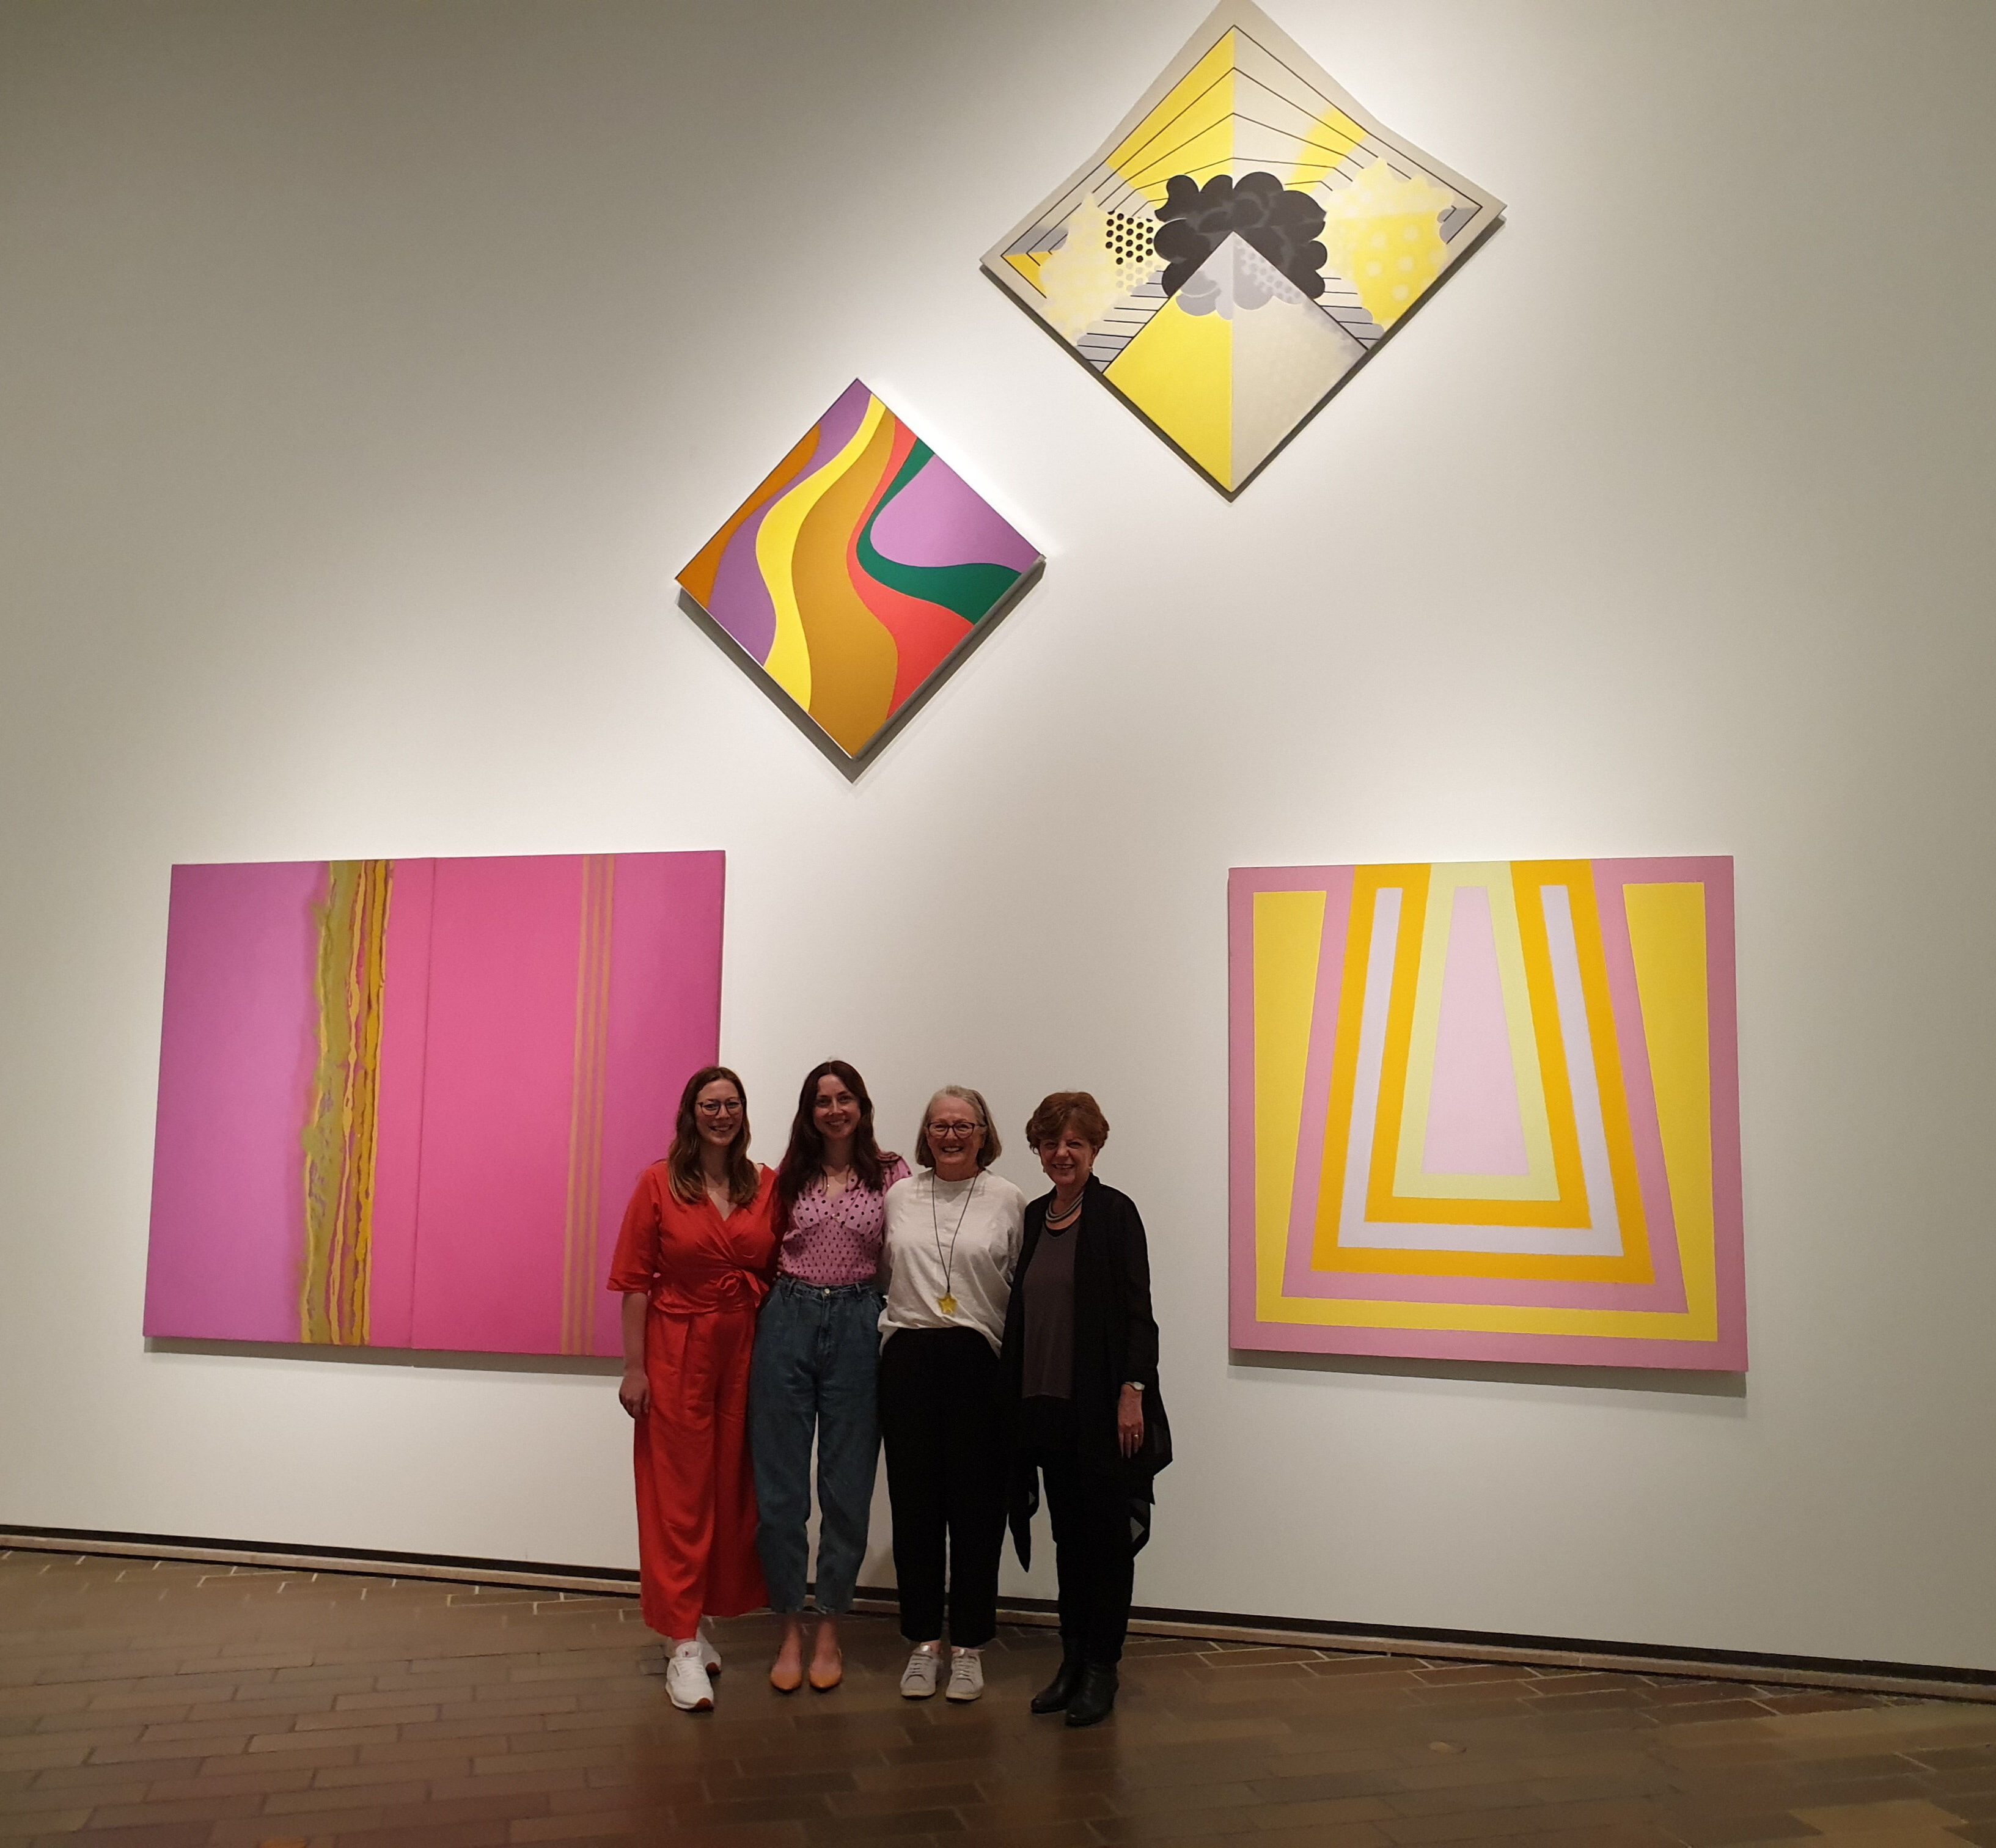 'Sukhavati No. 5' by Margret Worth in the exhibition 'Know My Name'.Curators R to L: Dr. Deborah Hart, (artist MW), Elspeth Pitt, Yvette Dal Pozzo beneath 'Sukhavati No. 5' in the exhibition of Australian women artists 1900 to 2020